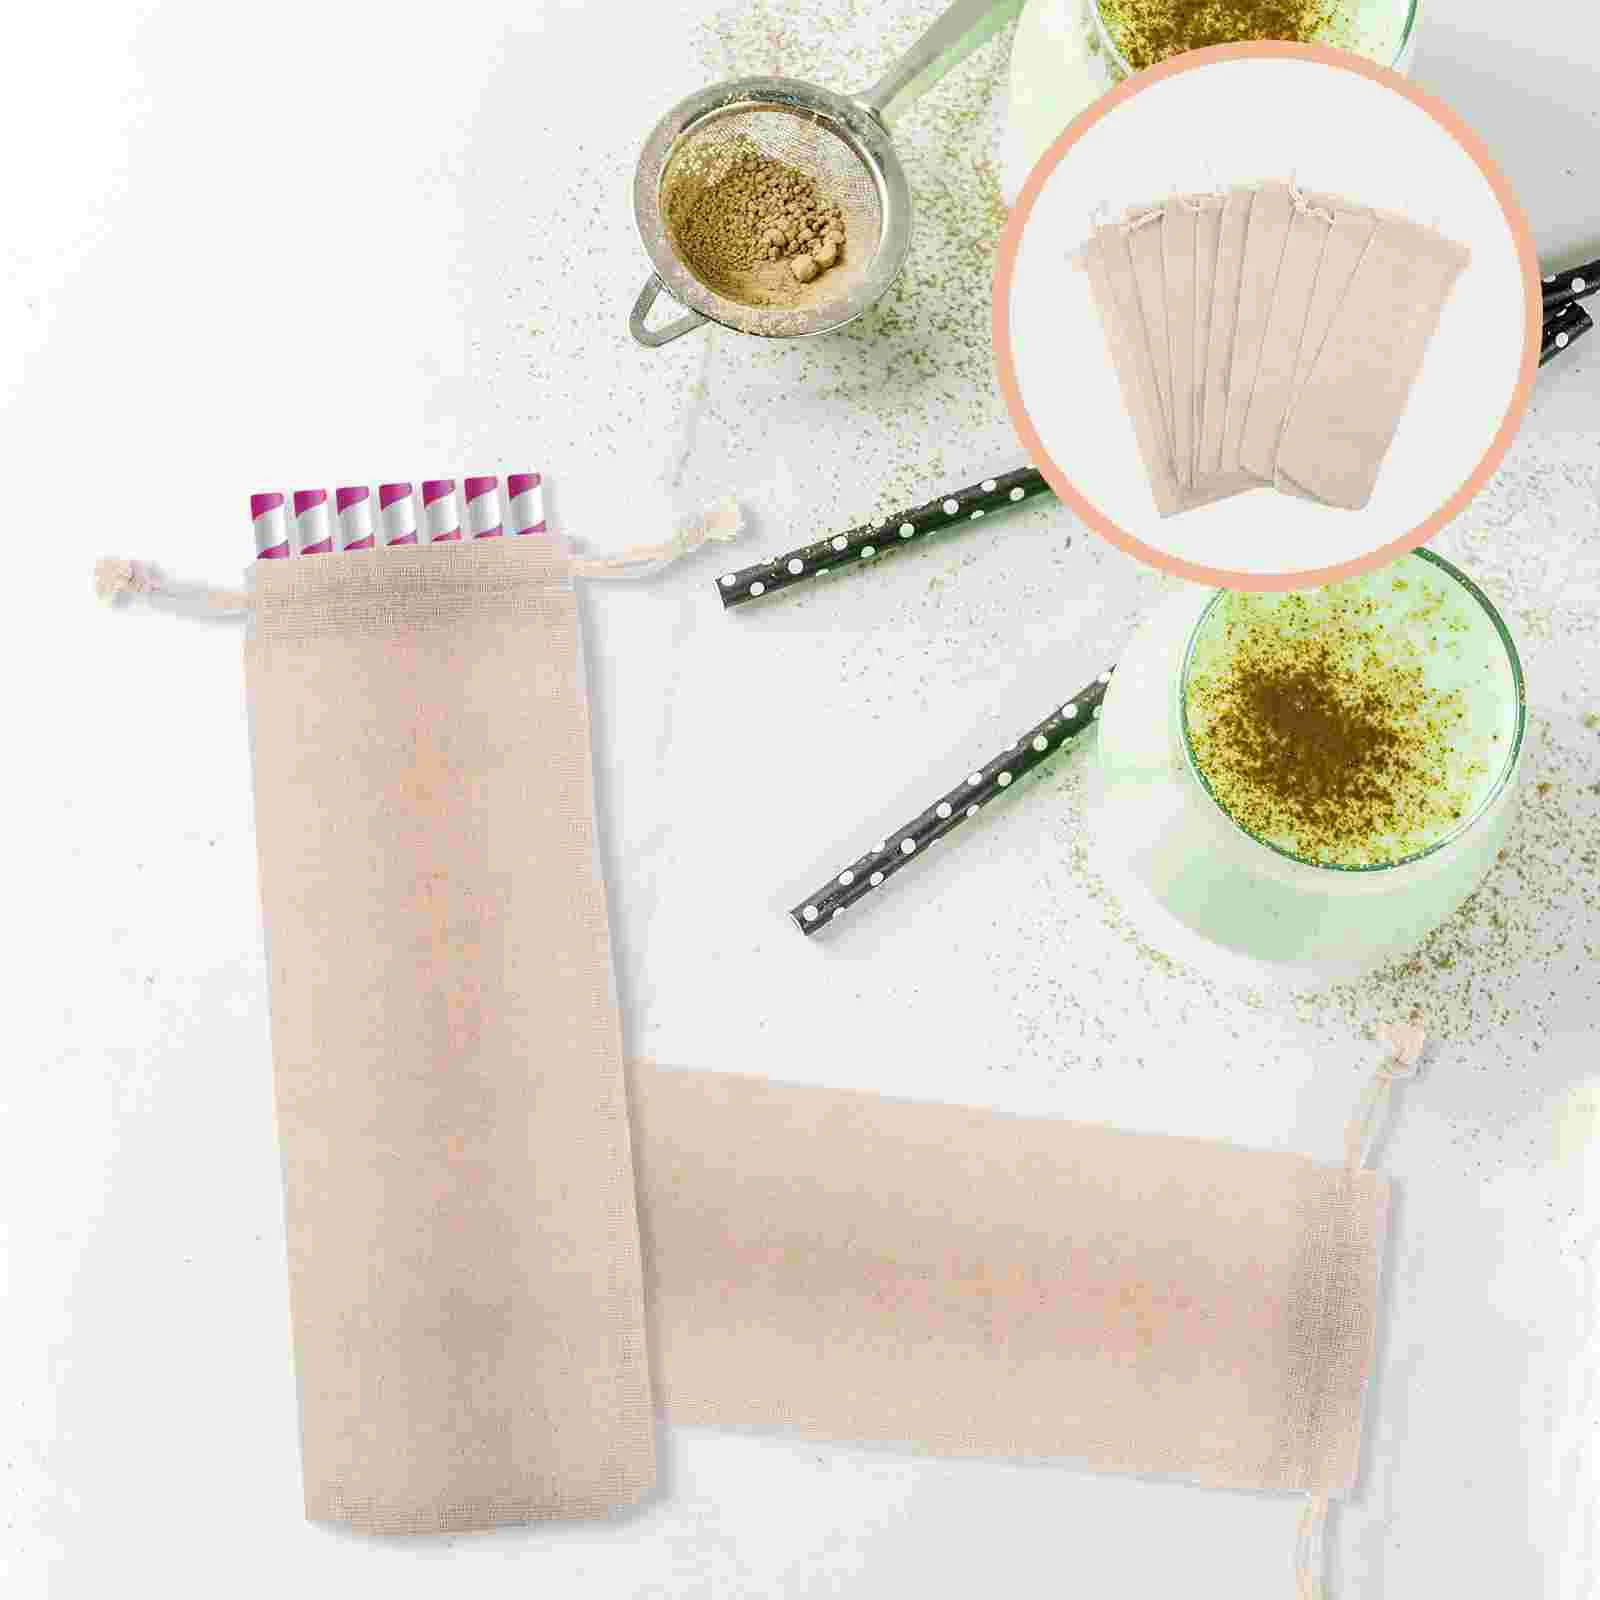 

Bag Bags Straw Straws Pouch Reusable Carrying Drinking Case Travel Forks Muslin Spoon Fork Cutlery Candy Favor Burlap Cotton